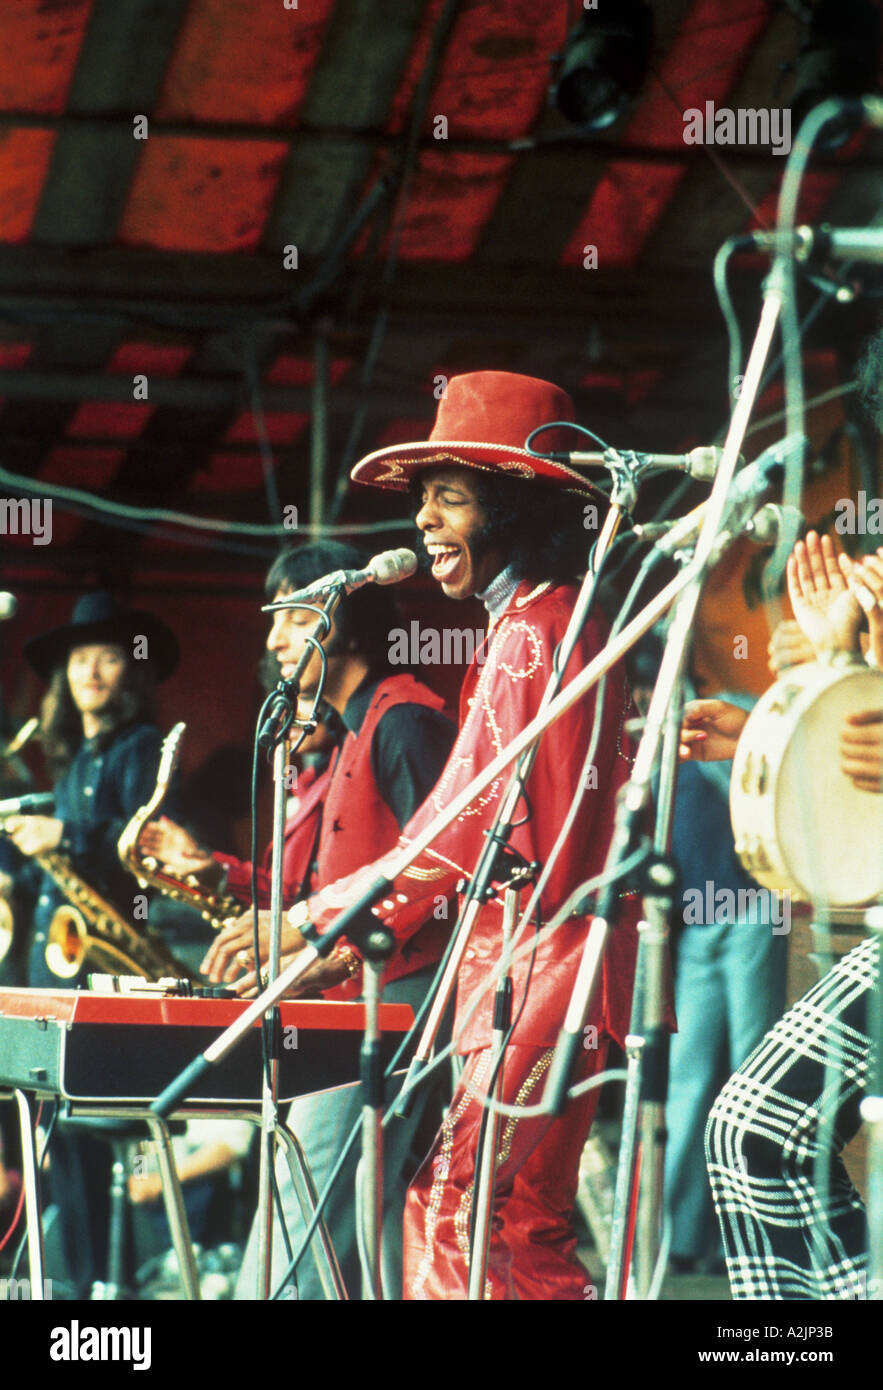 SLY AND THE FAMILY STONE American grouip led by Sly Stone Stock Photo